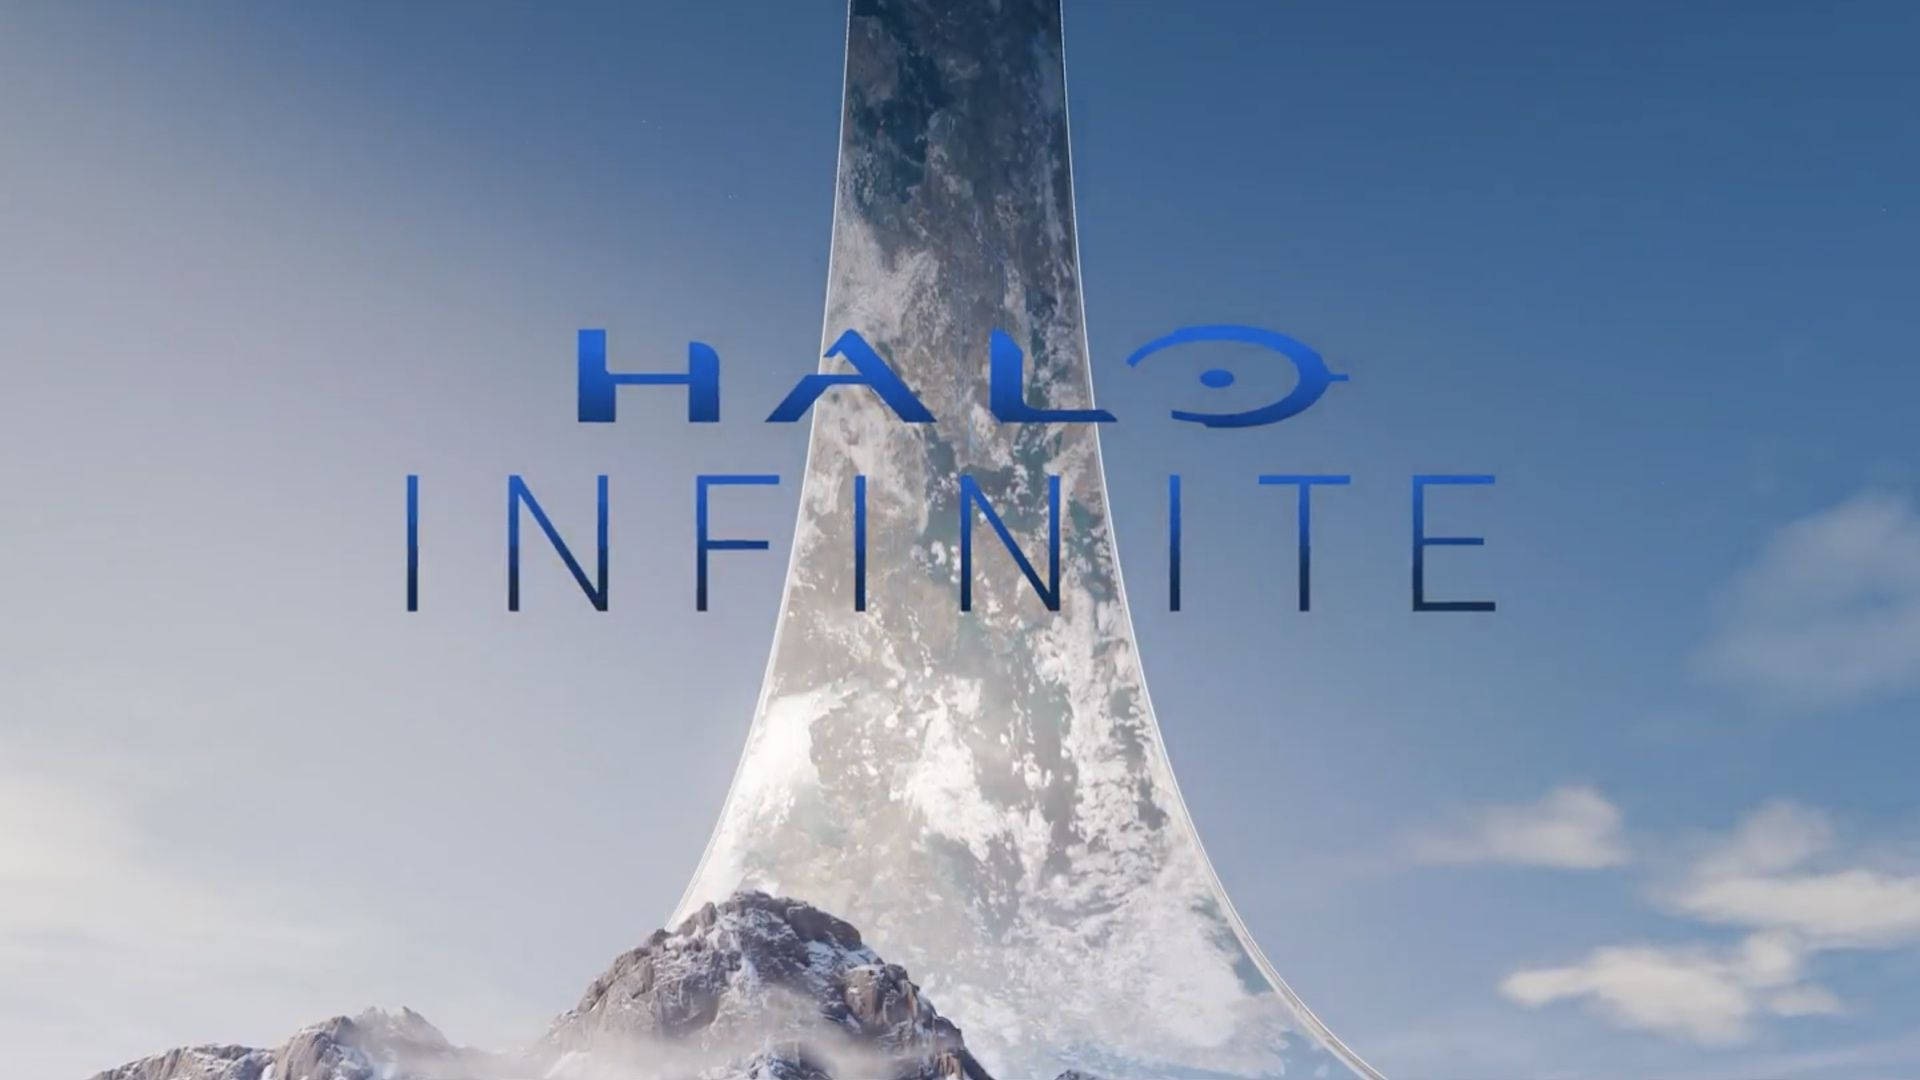 1920X1080 Halo Infinite Wallpaper and Background